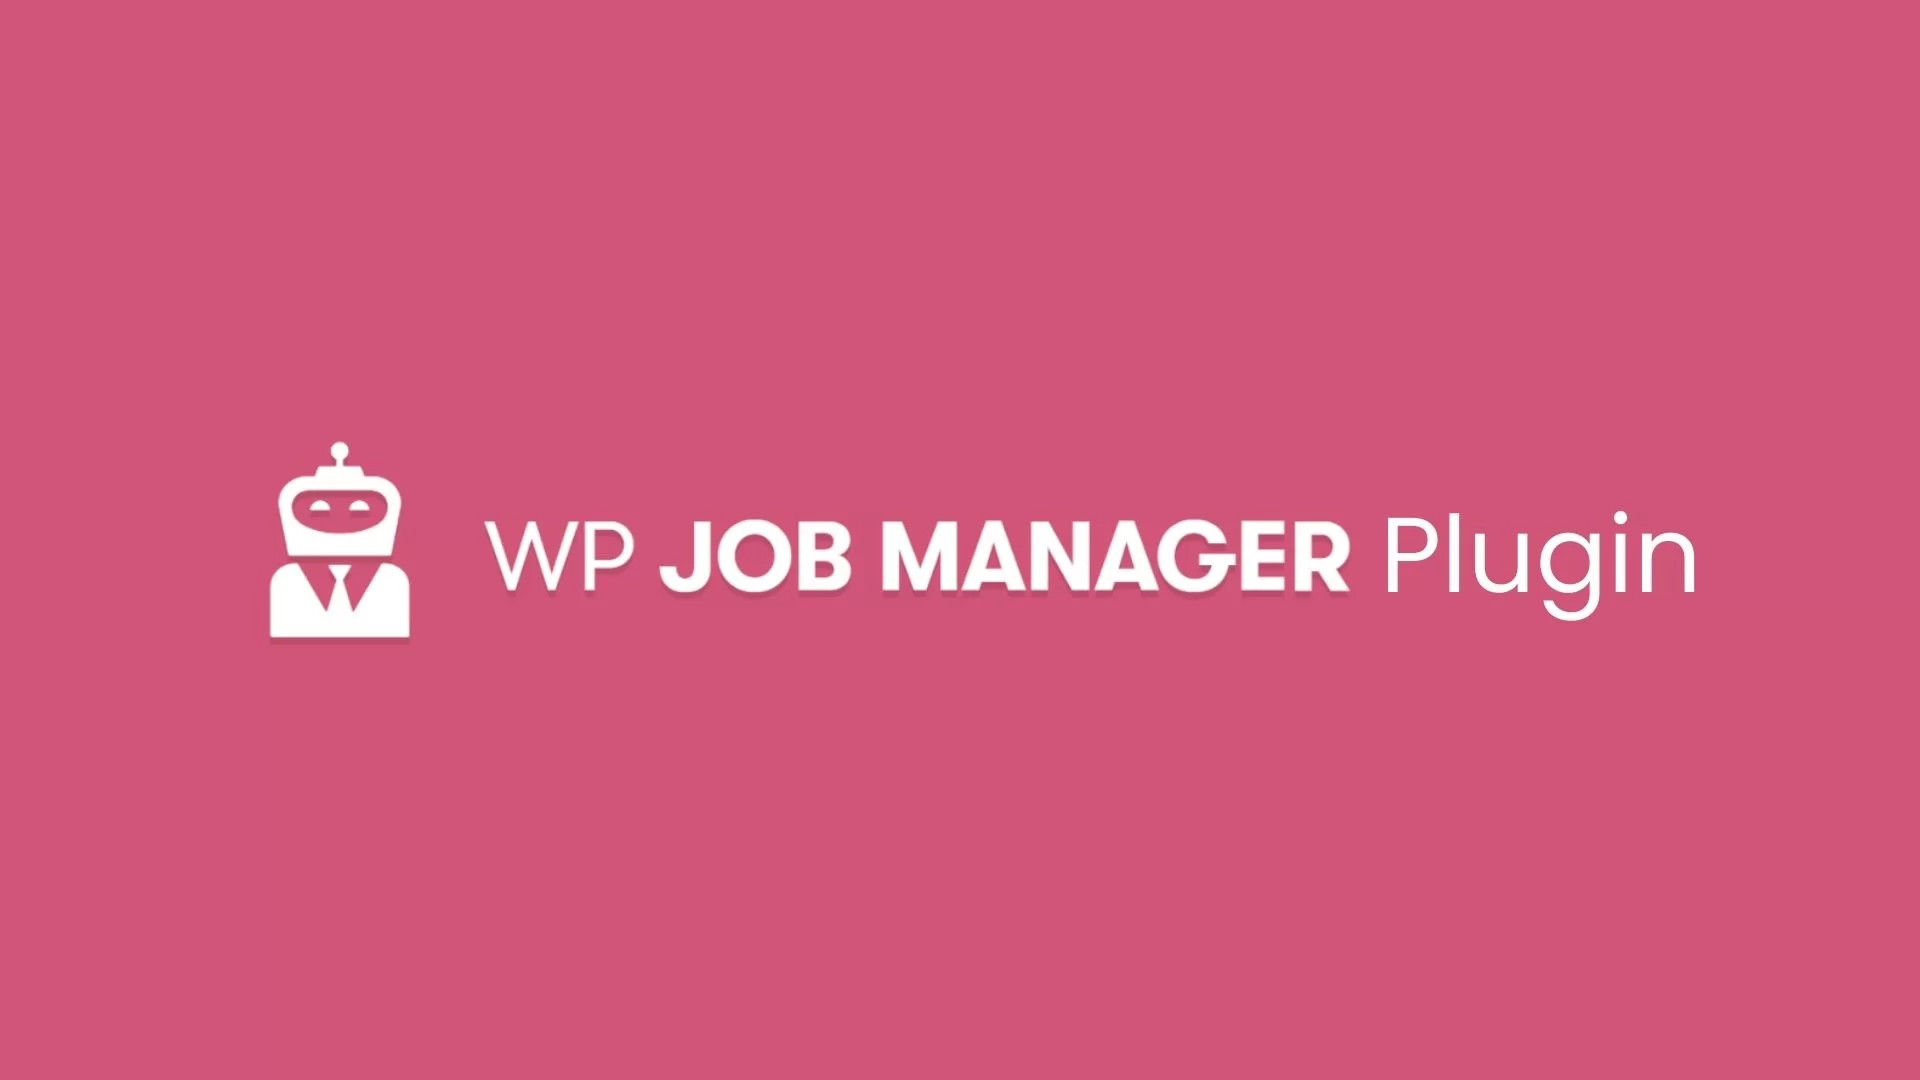 What Does WP Job Manager Plugin Offer?